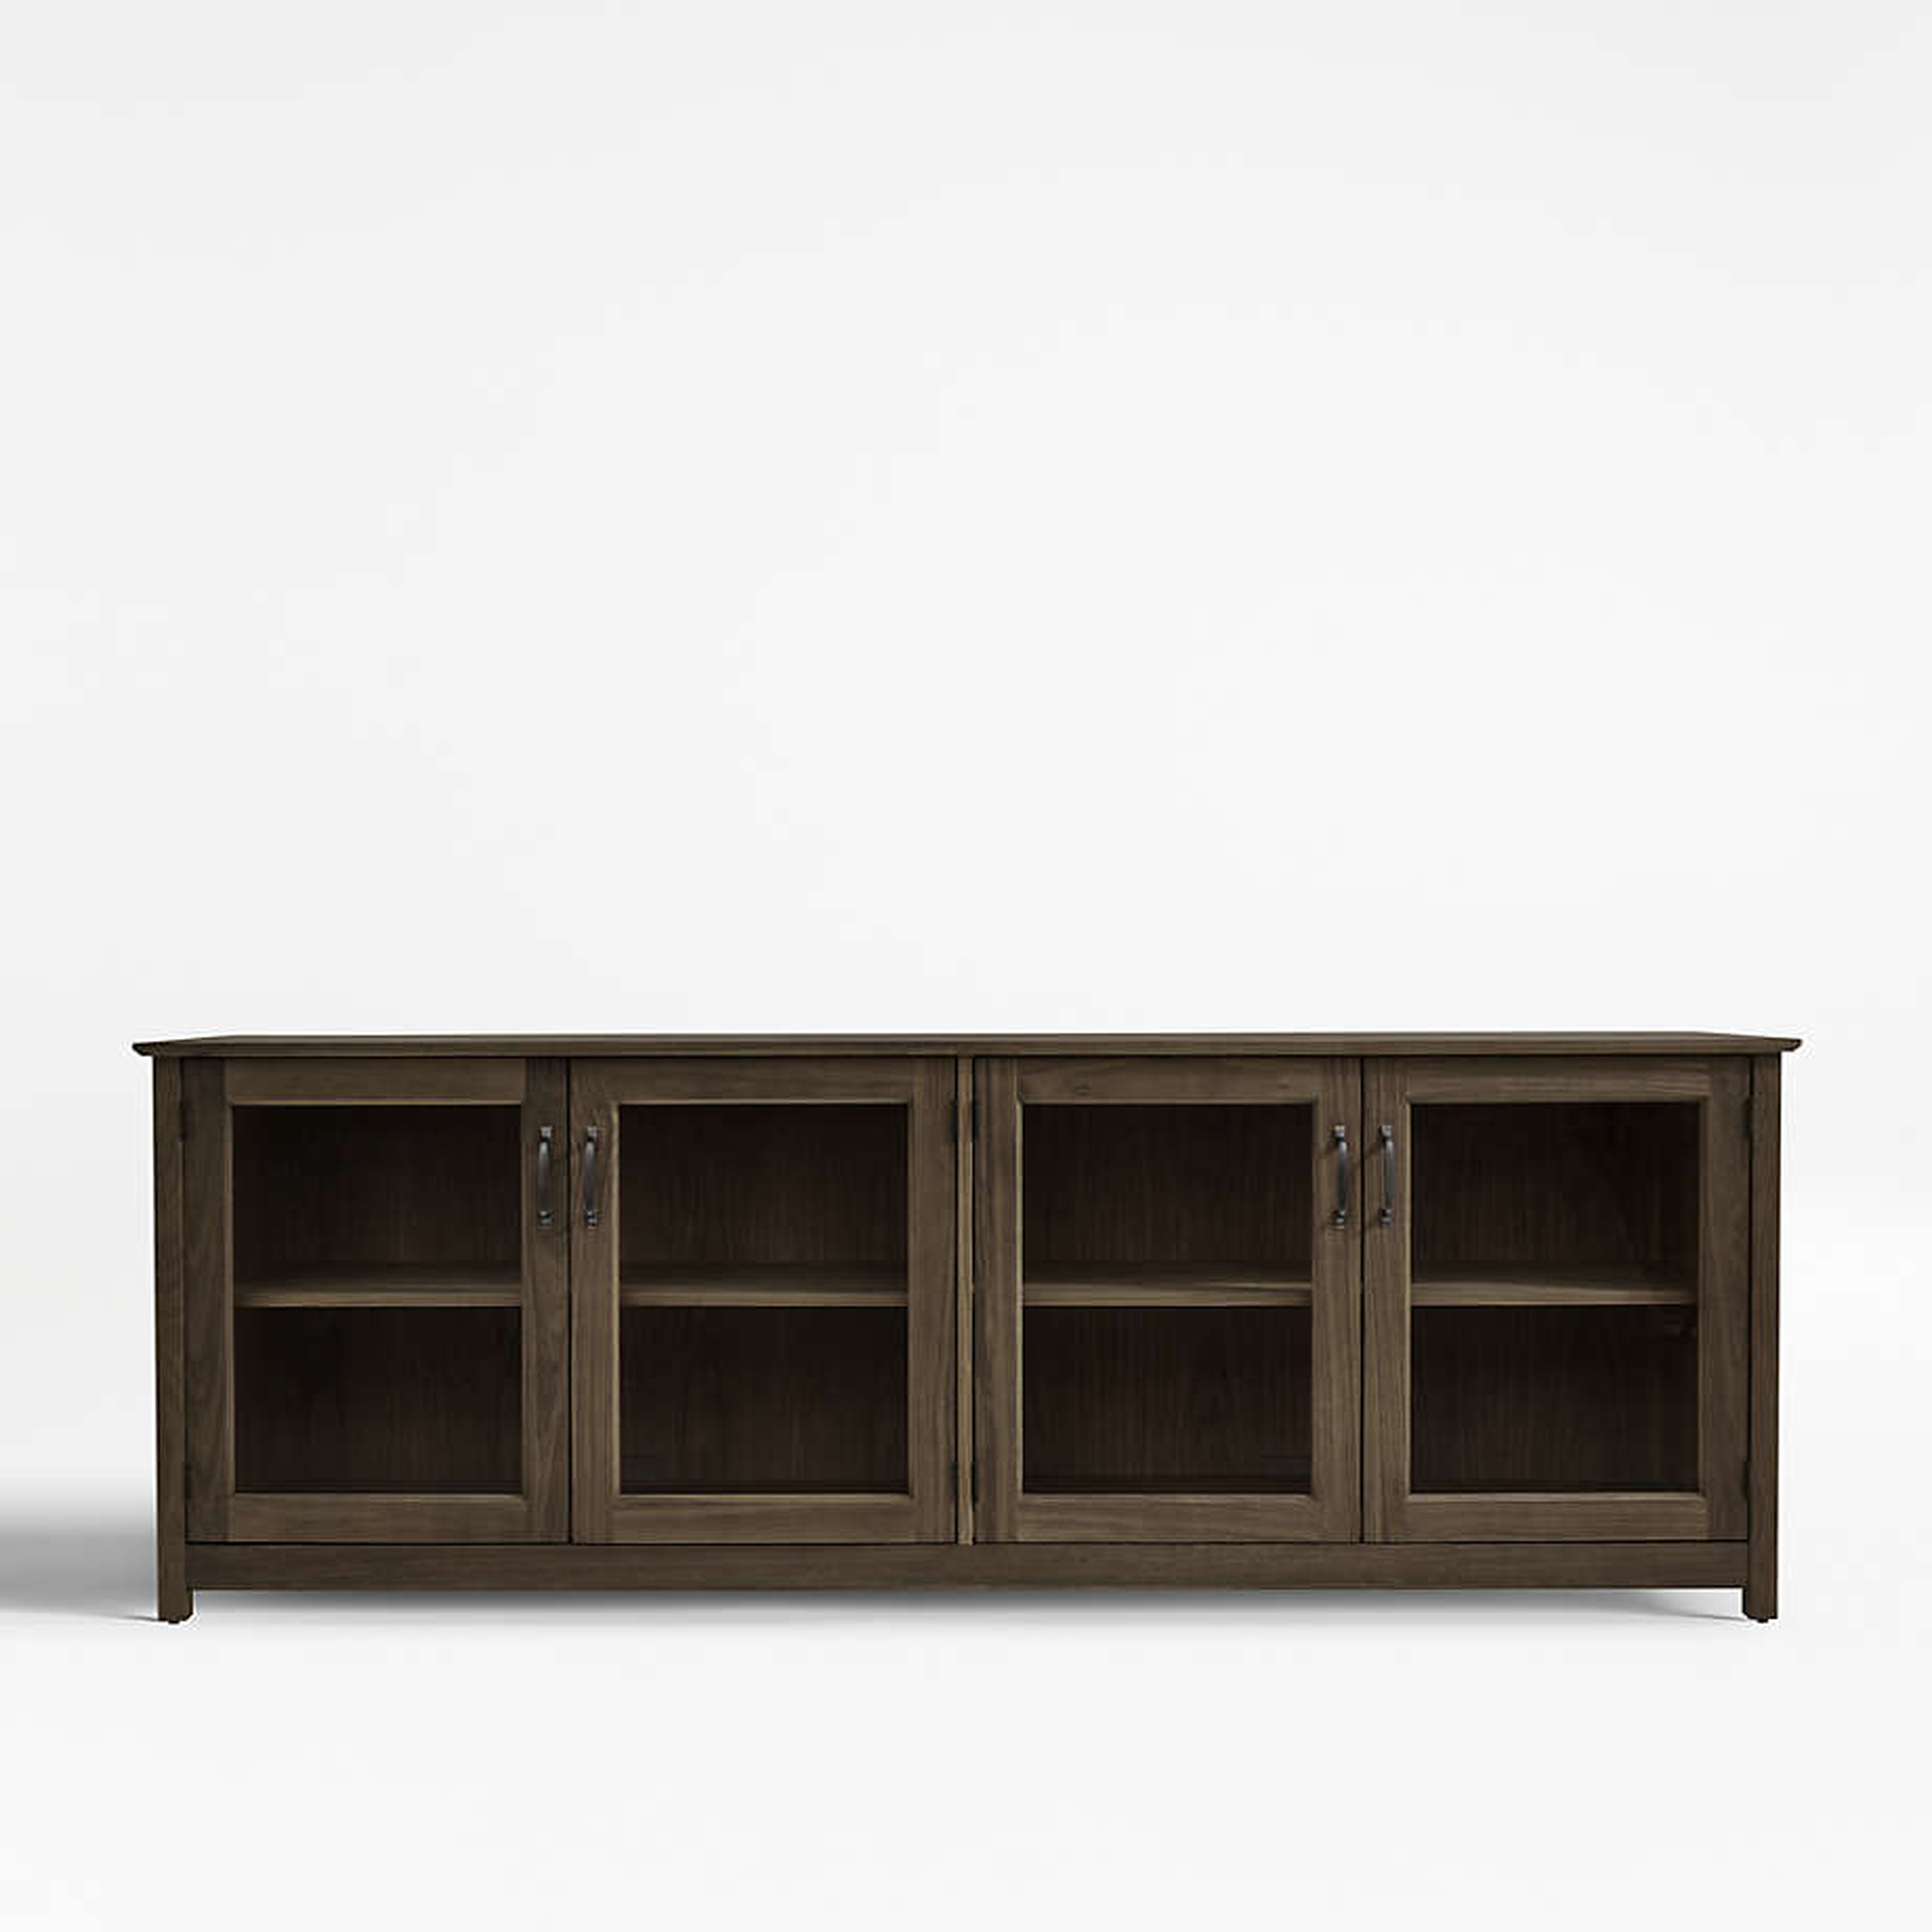 Ainsworth Walnut 85" Storage Media Console with Glass/Wood Doors - Crate and Barrel